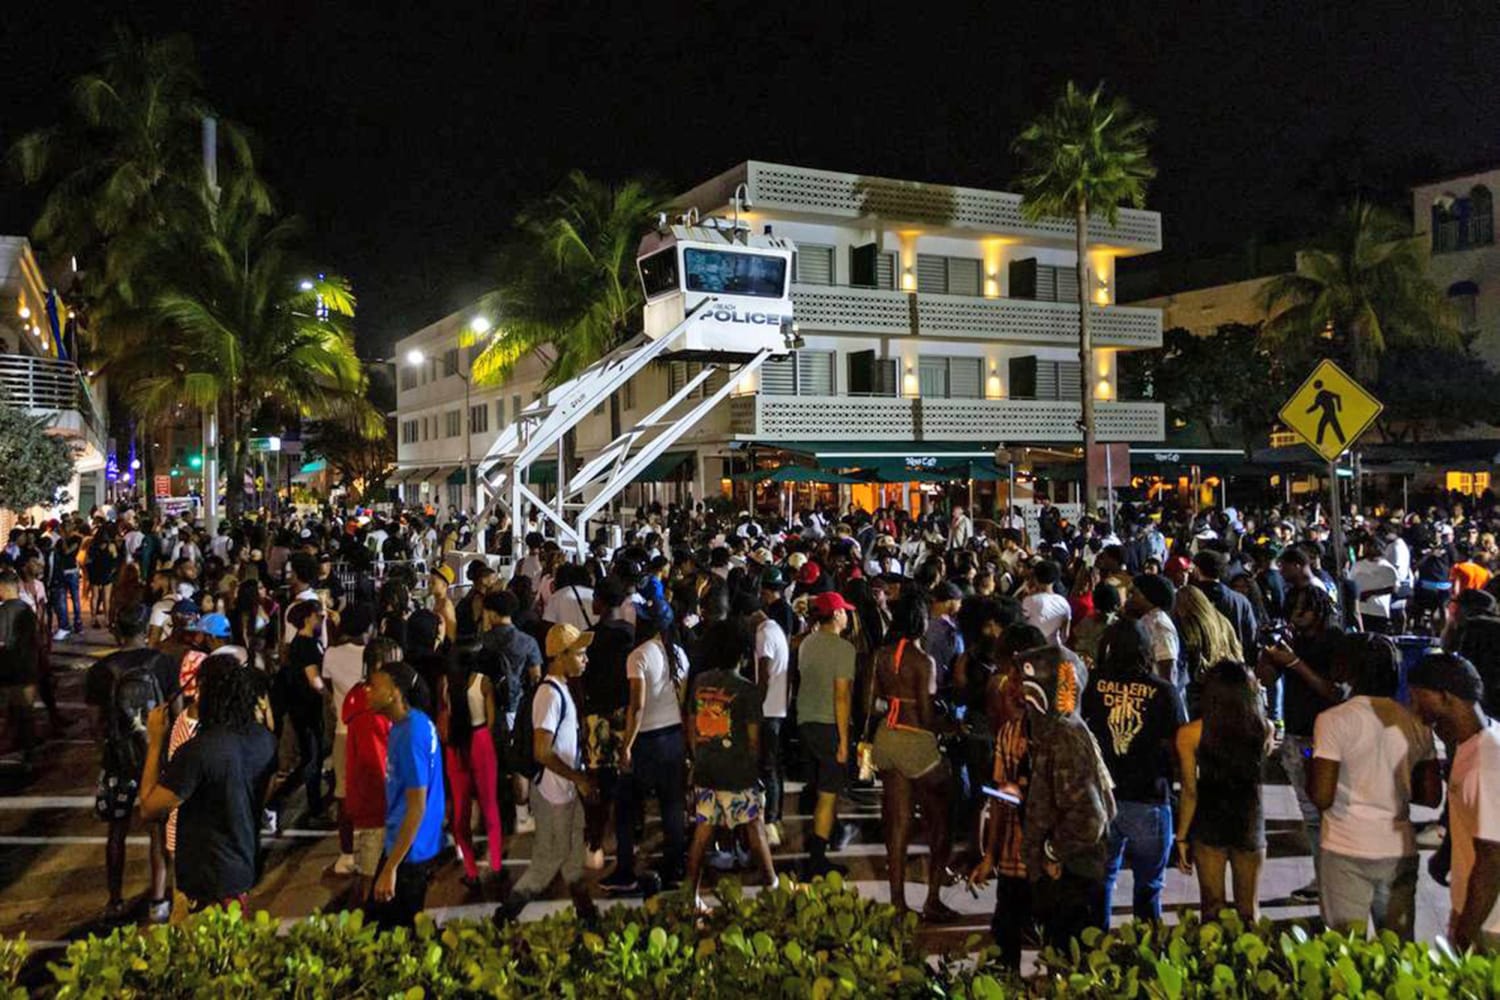 After deadly shootings during spring break, Miami Beach officials reckon with ‘lawless' crowds